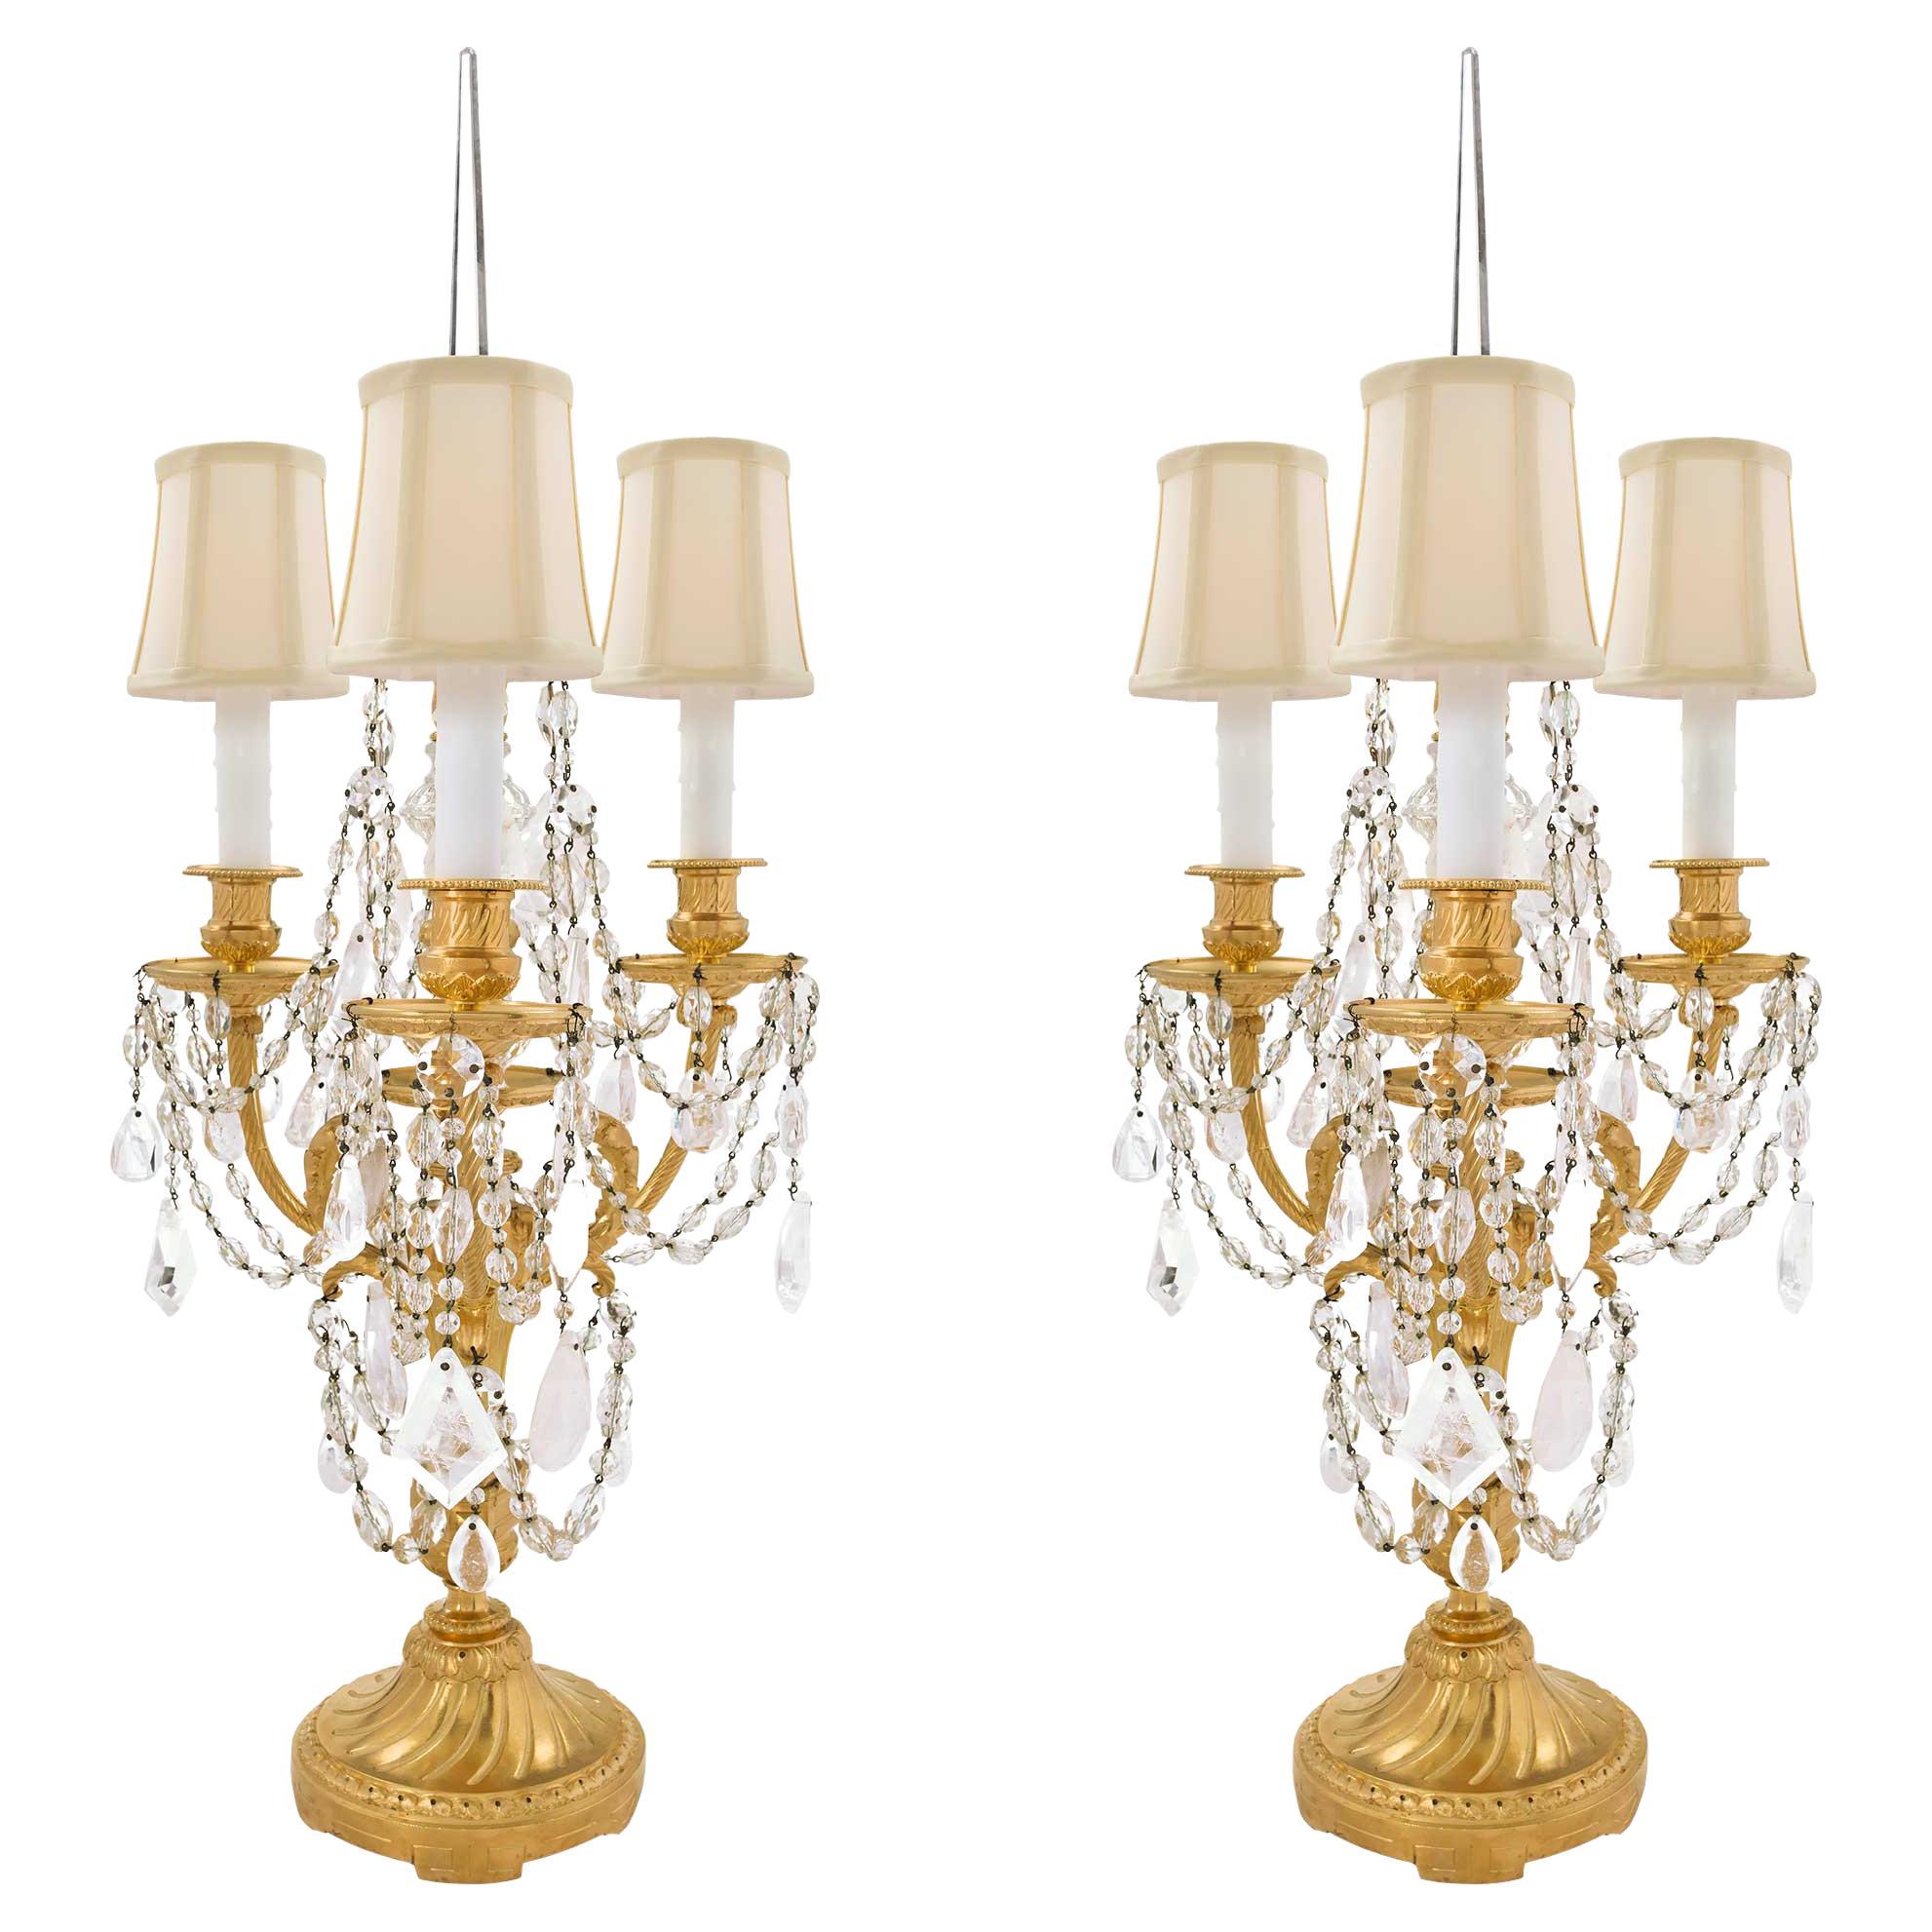 Pair of French 19th Century Louis XVI Style Rock Crystal Girandoles Lamps For Sale